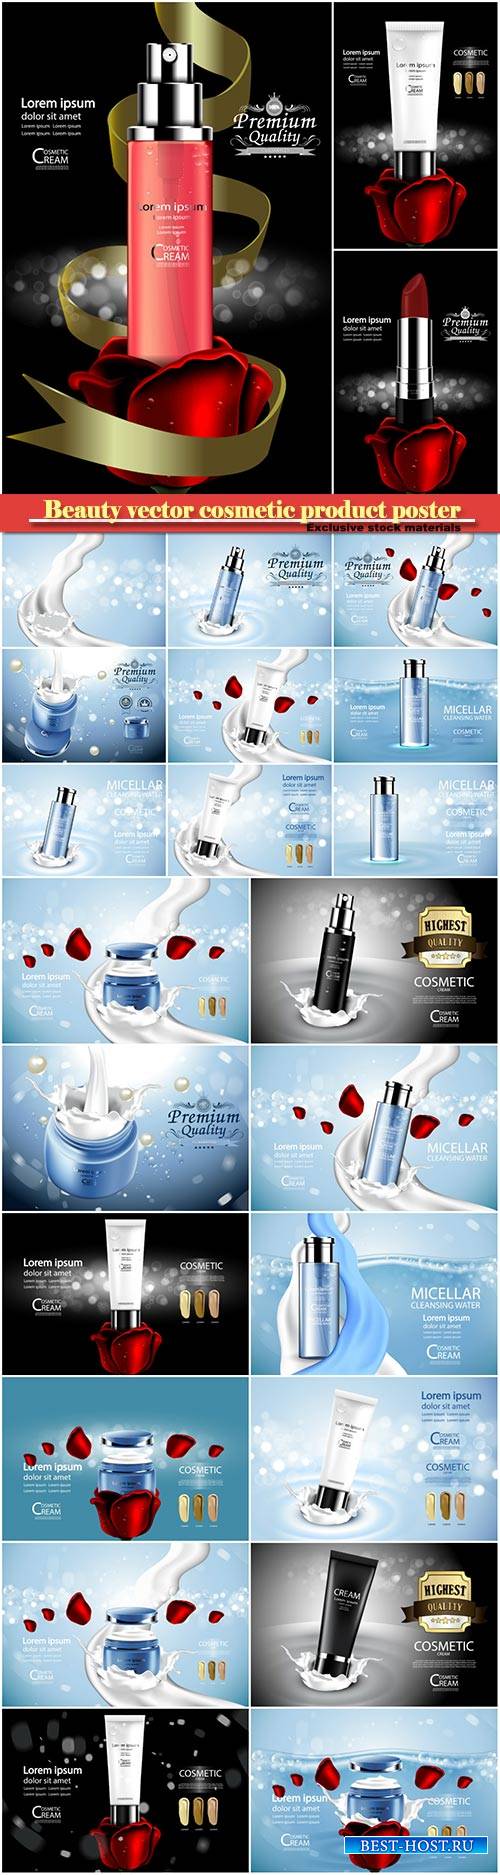 Beauty vector cosmetic product poster # 19